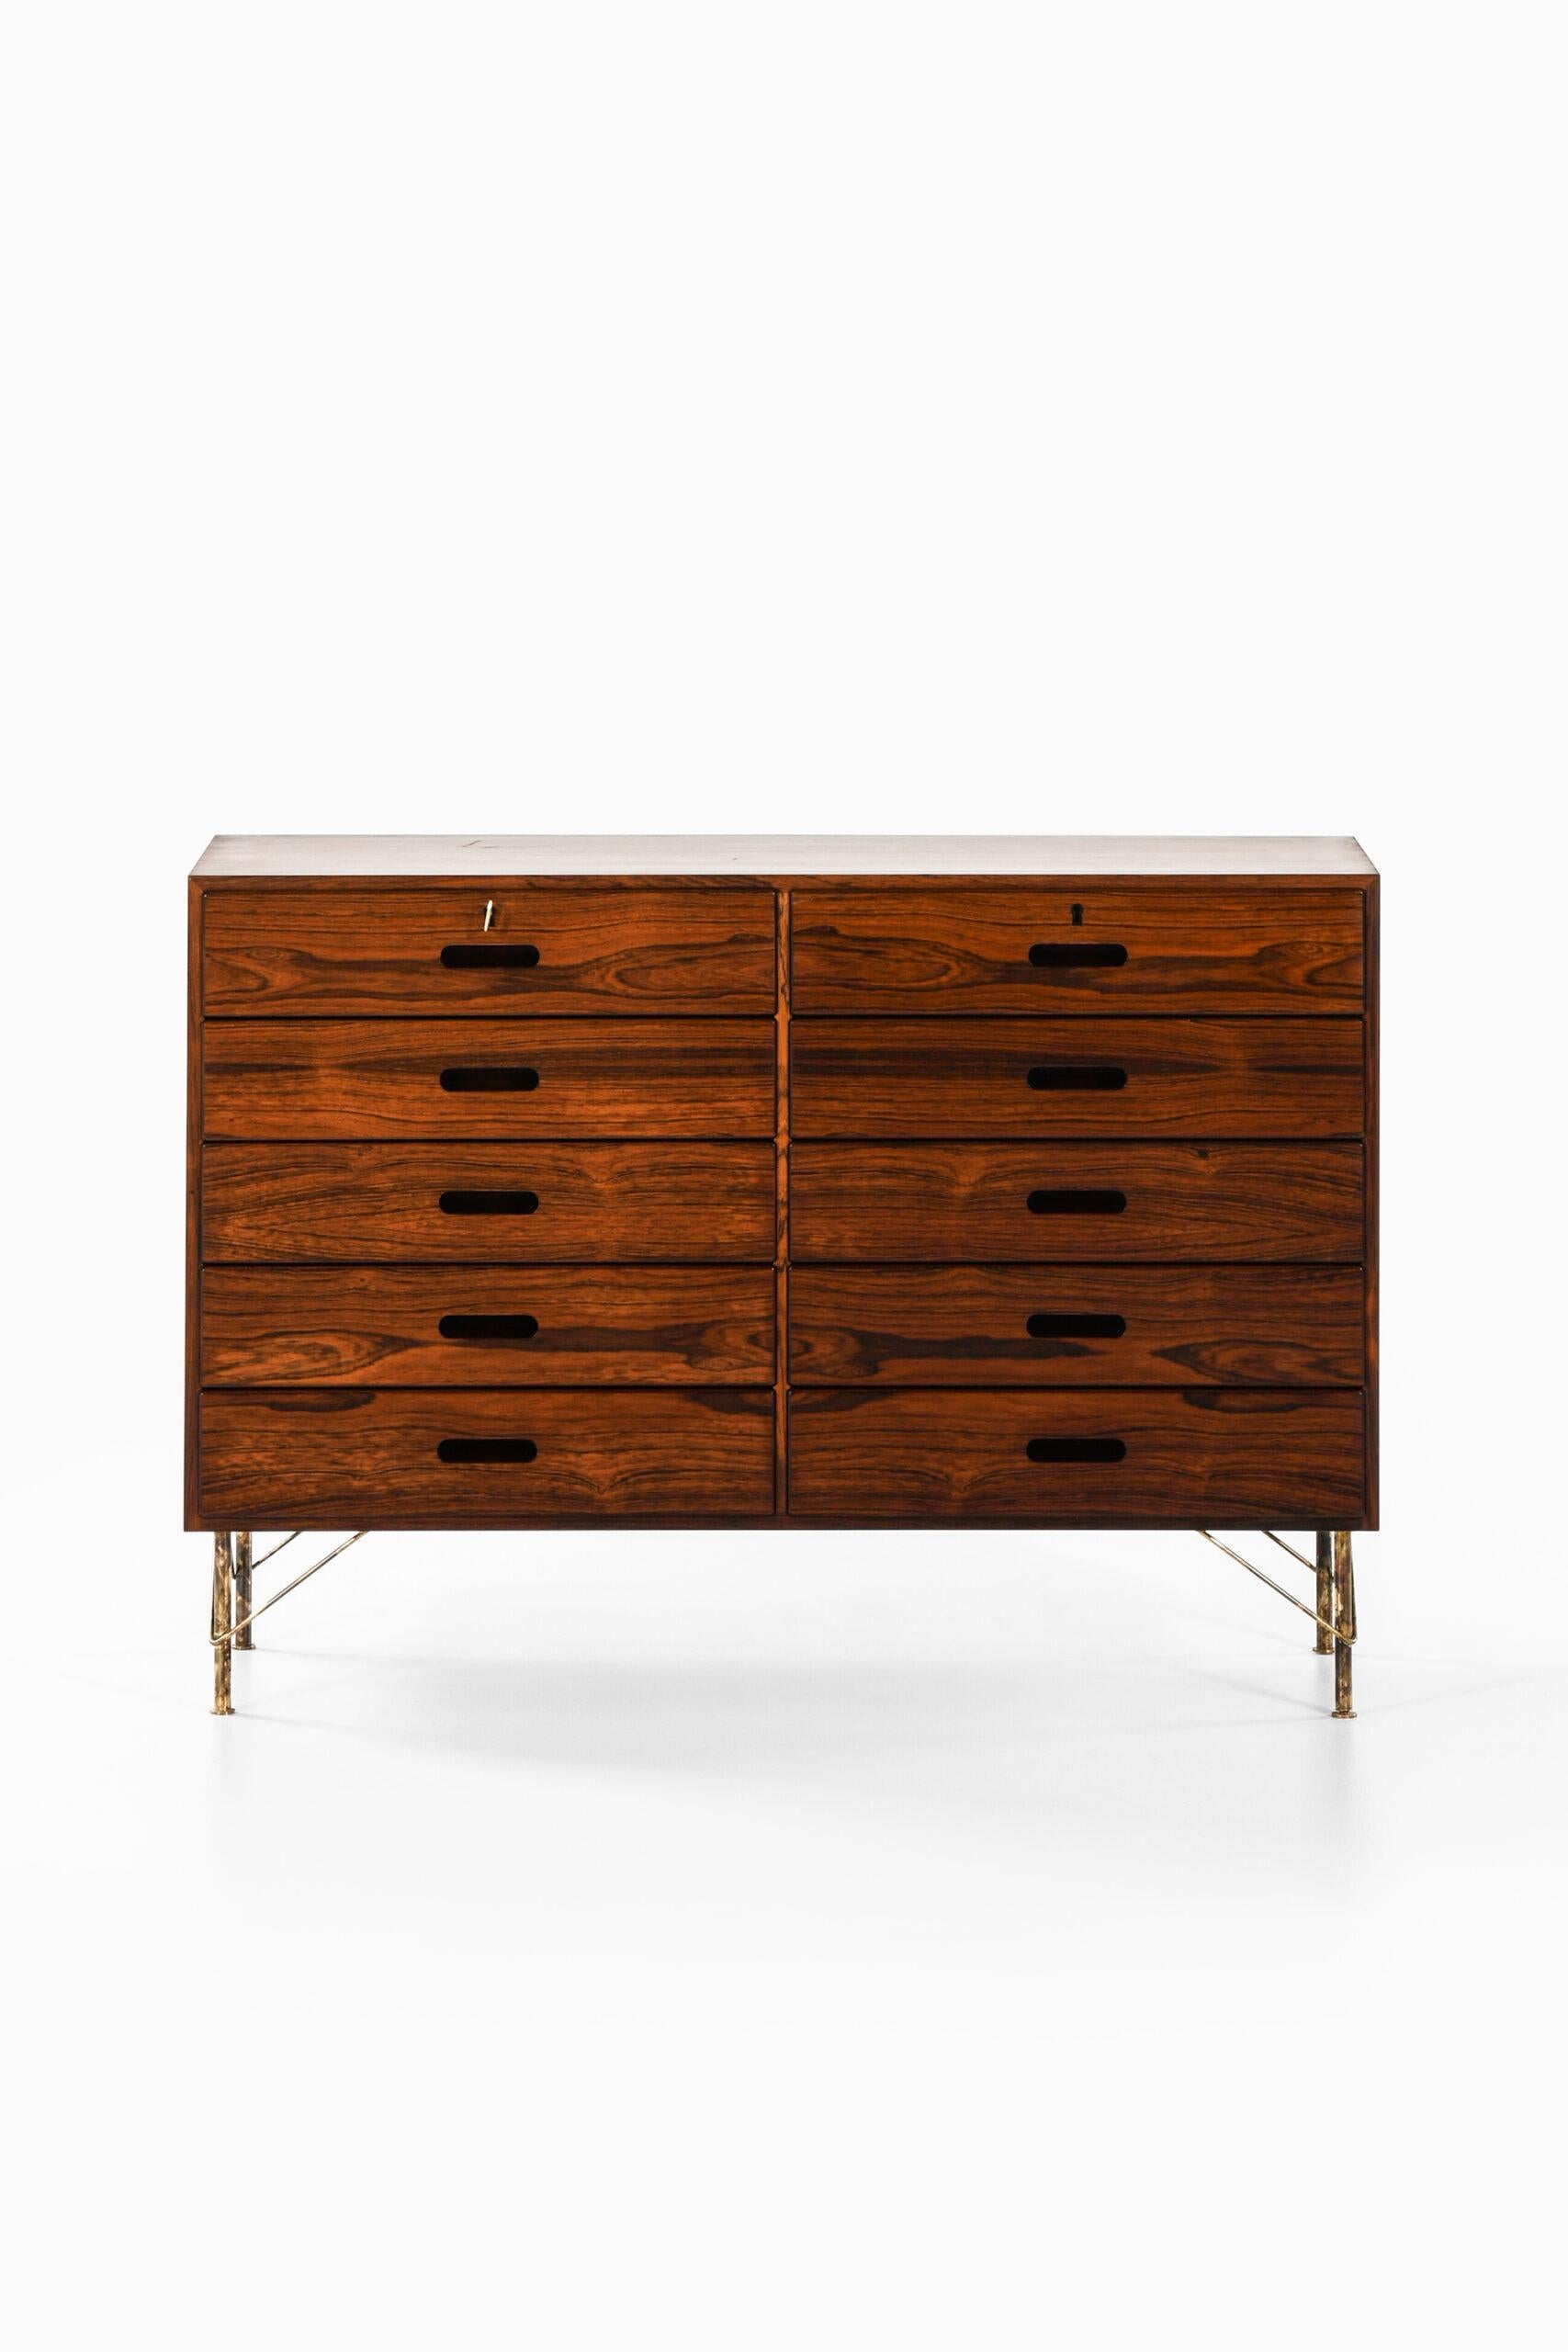 Rare bureau / sideboard designed by Kai Winding. Produced by Poul Hundevad Møbler in Denmark.
A pair available.